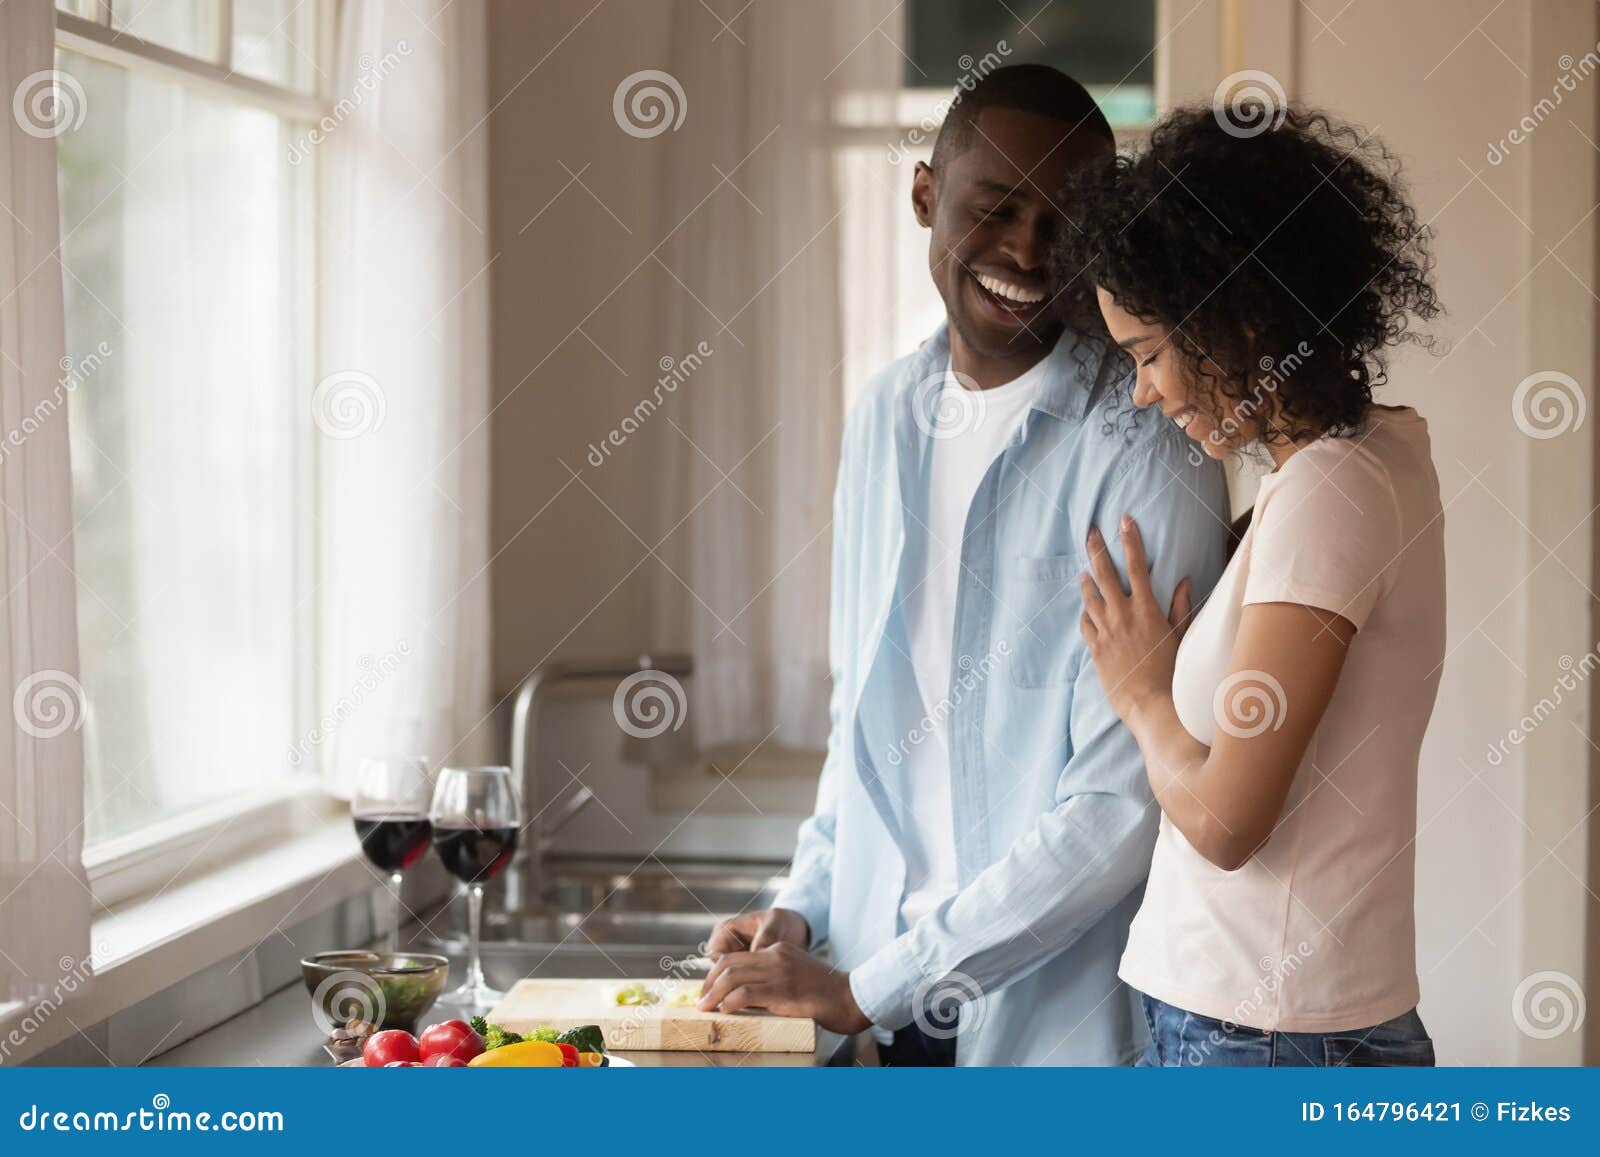 Happy biracial couple enjoy romantic date together. Happy loving african American couple enjoy weekend at home cooking in kitchen together, smiling caring biracial husband and wife have fun rest indoors prepare food spend romantic domestic date